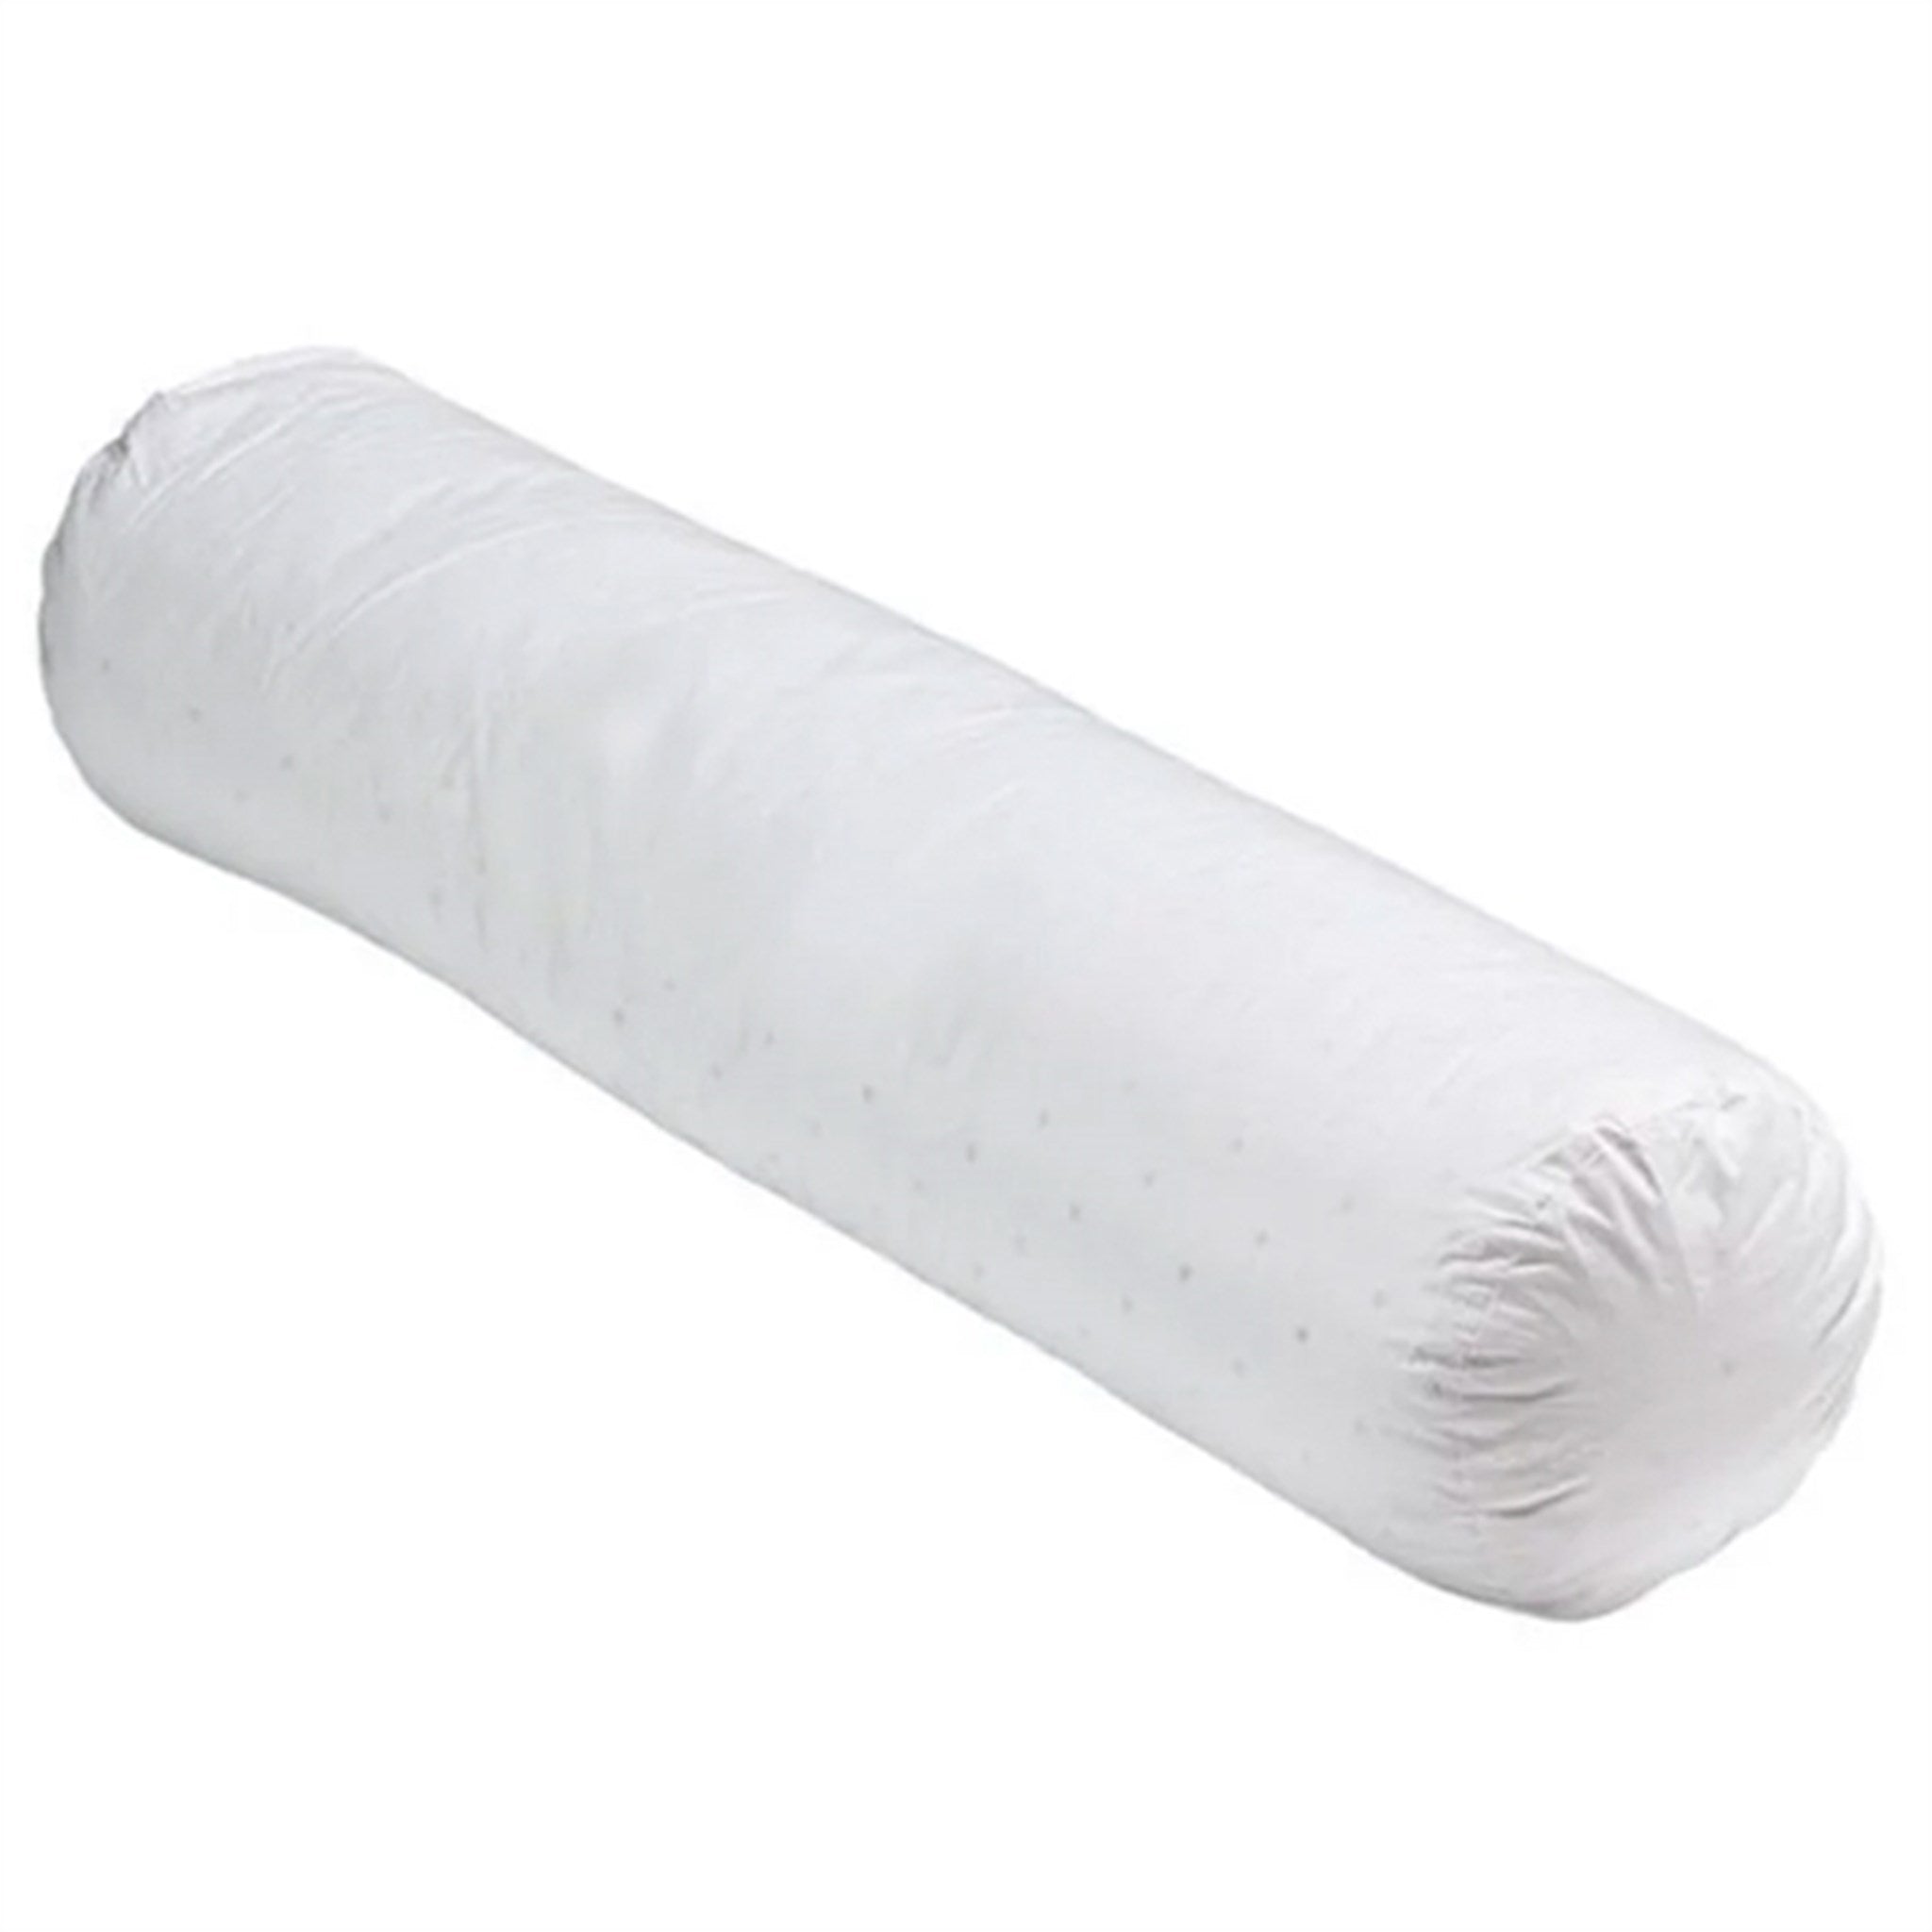 Fossflakes Comfort I-Pillow Junior incl. Cover